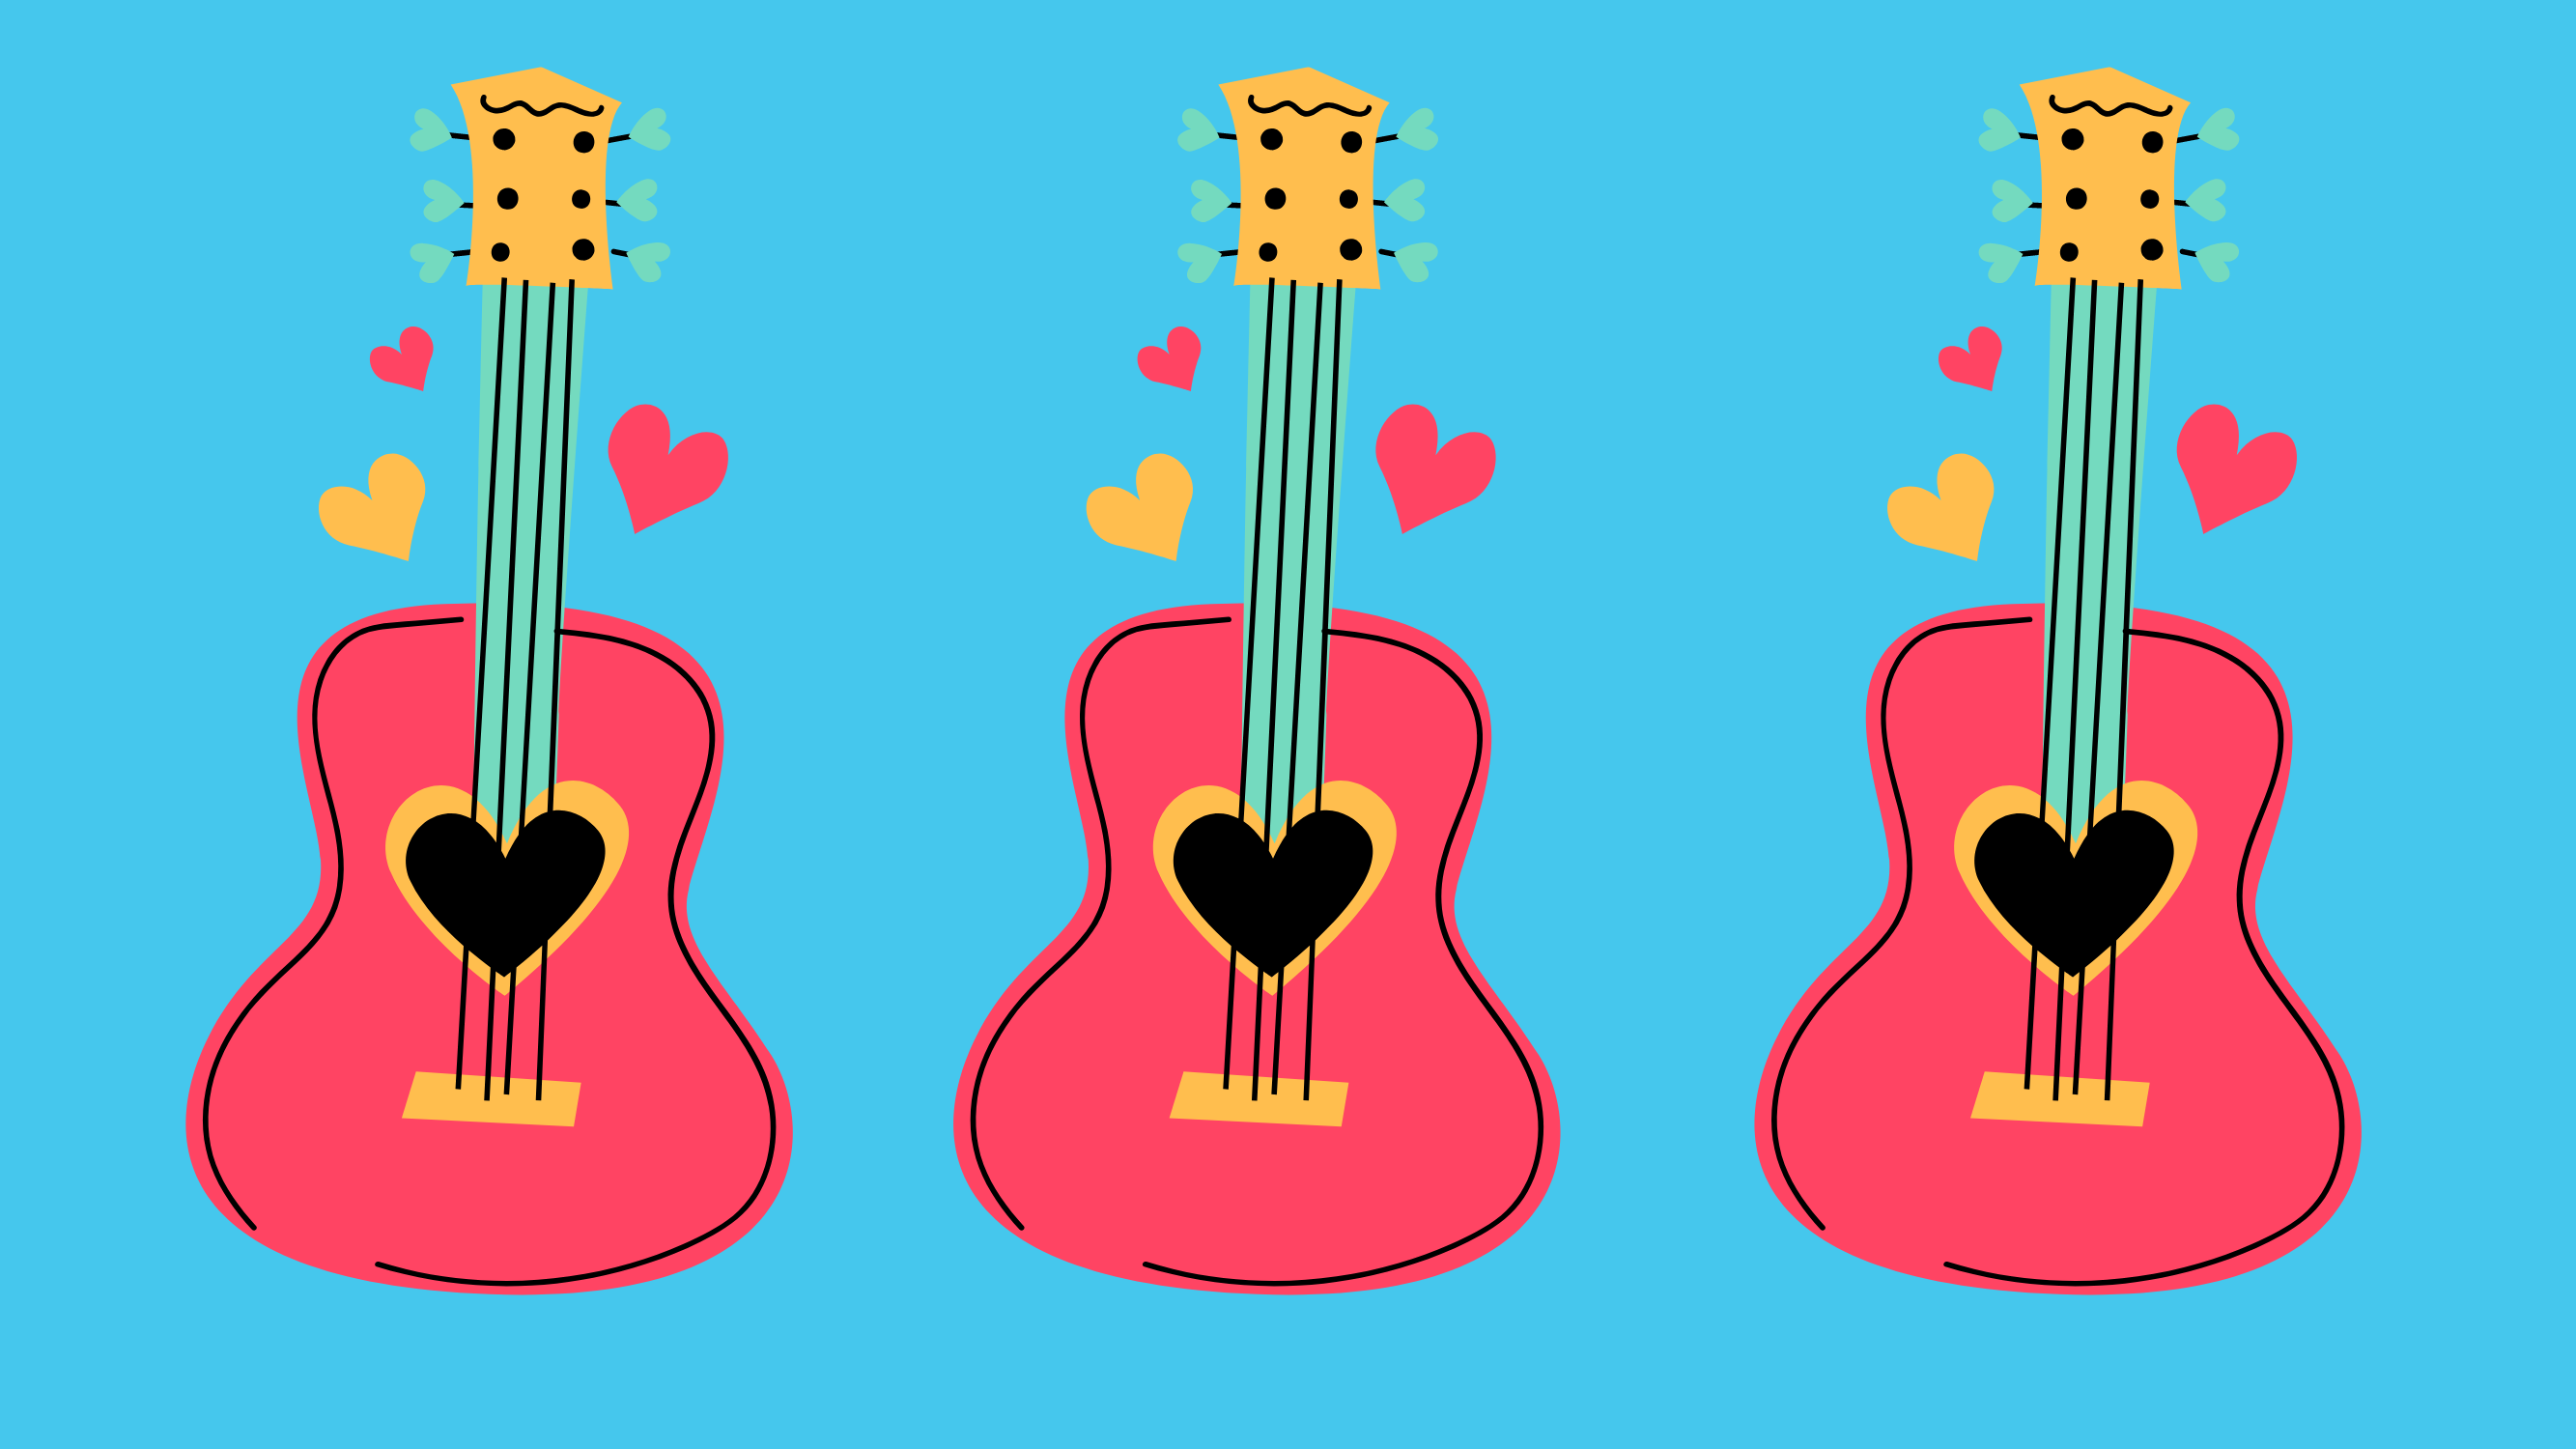 three guitars with colorful background